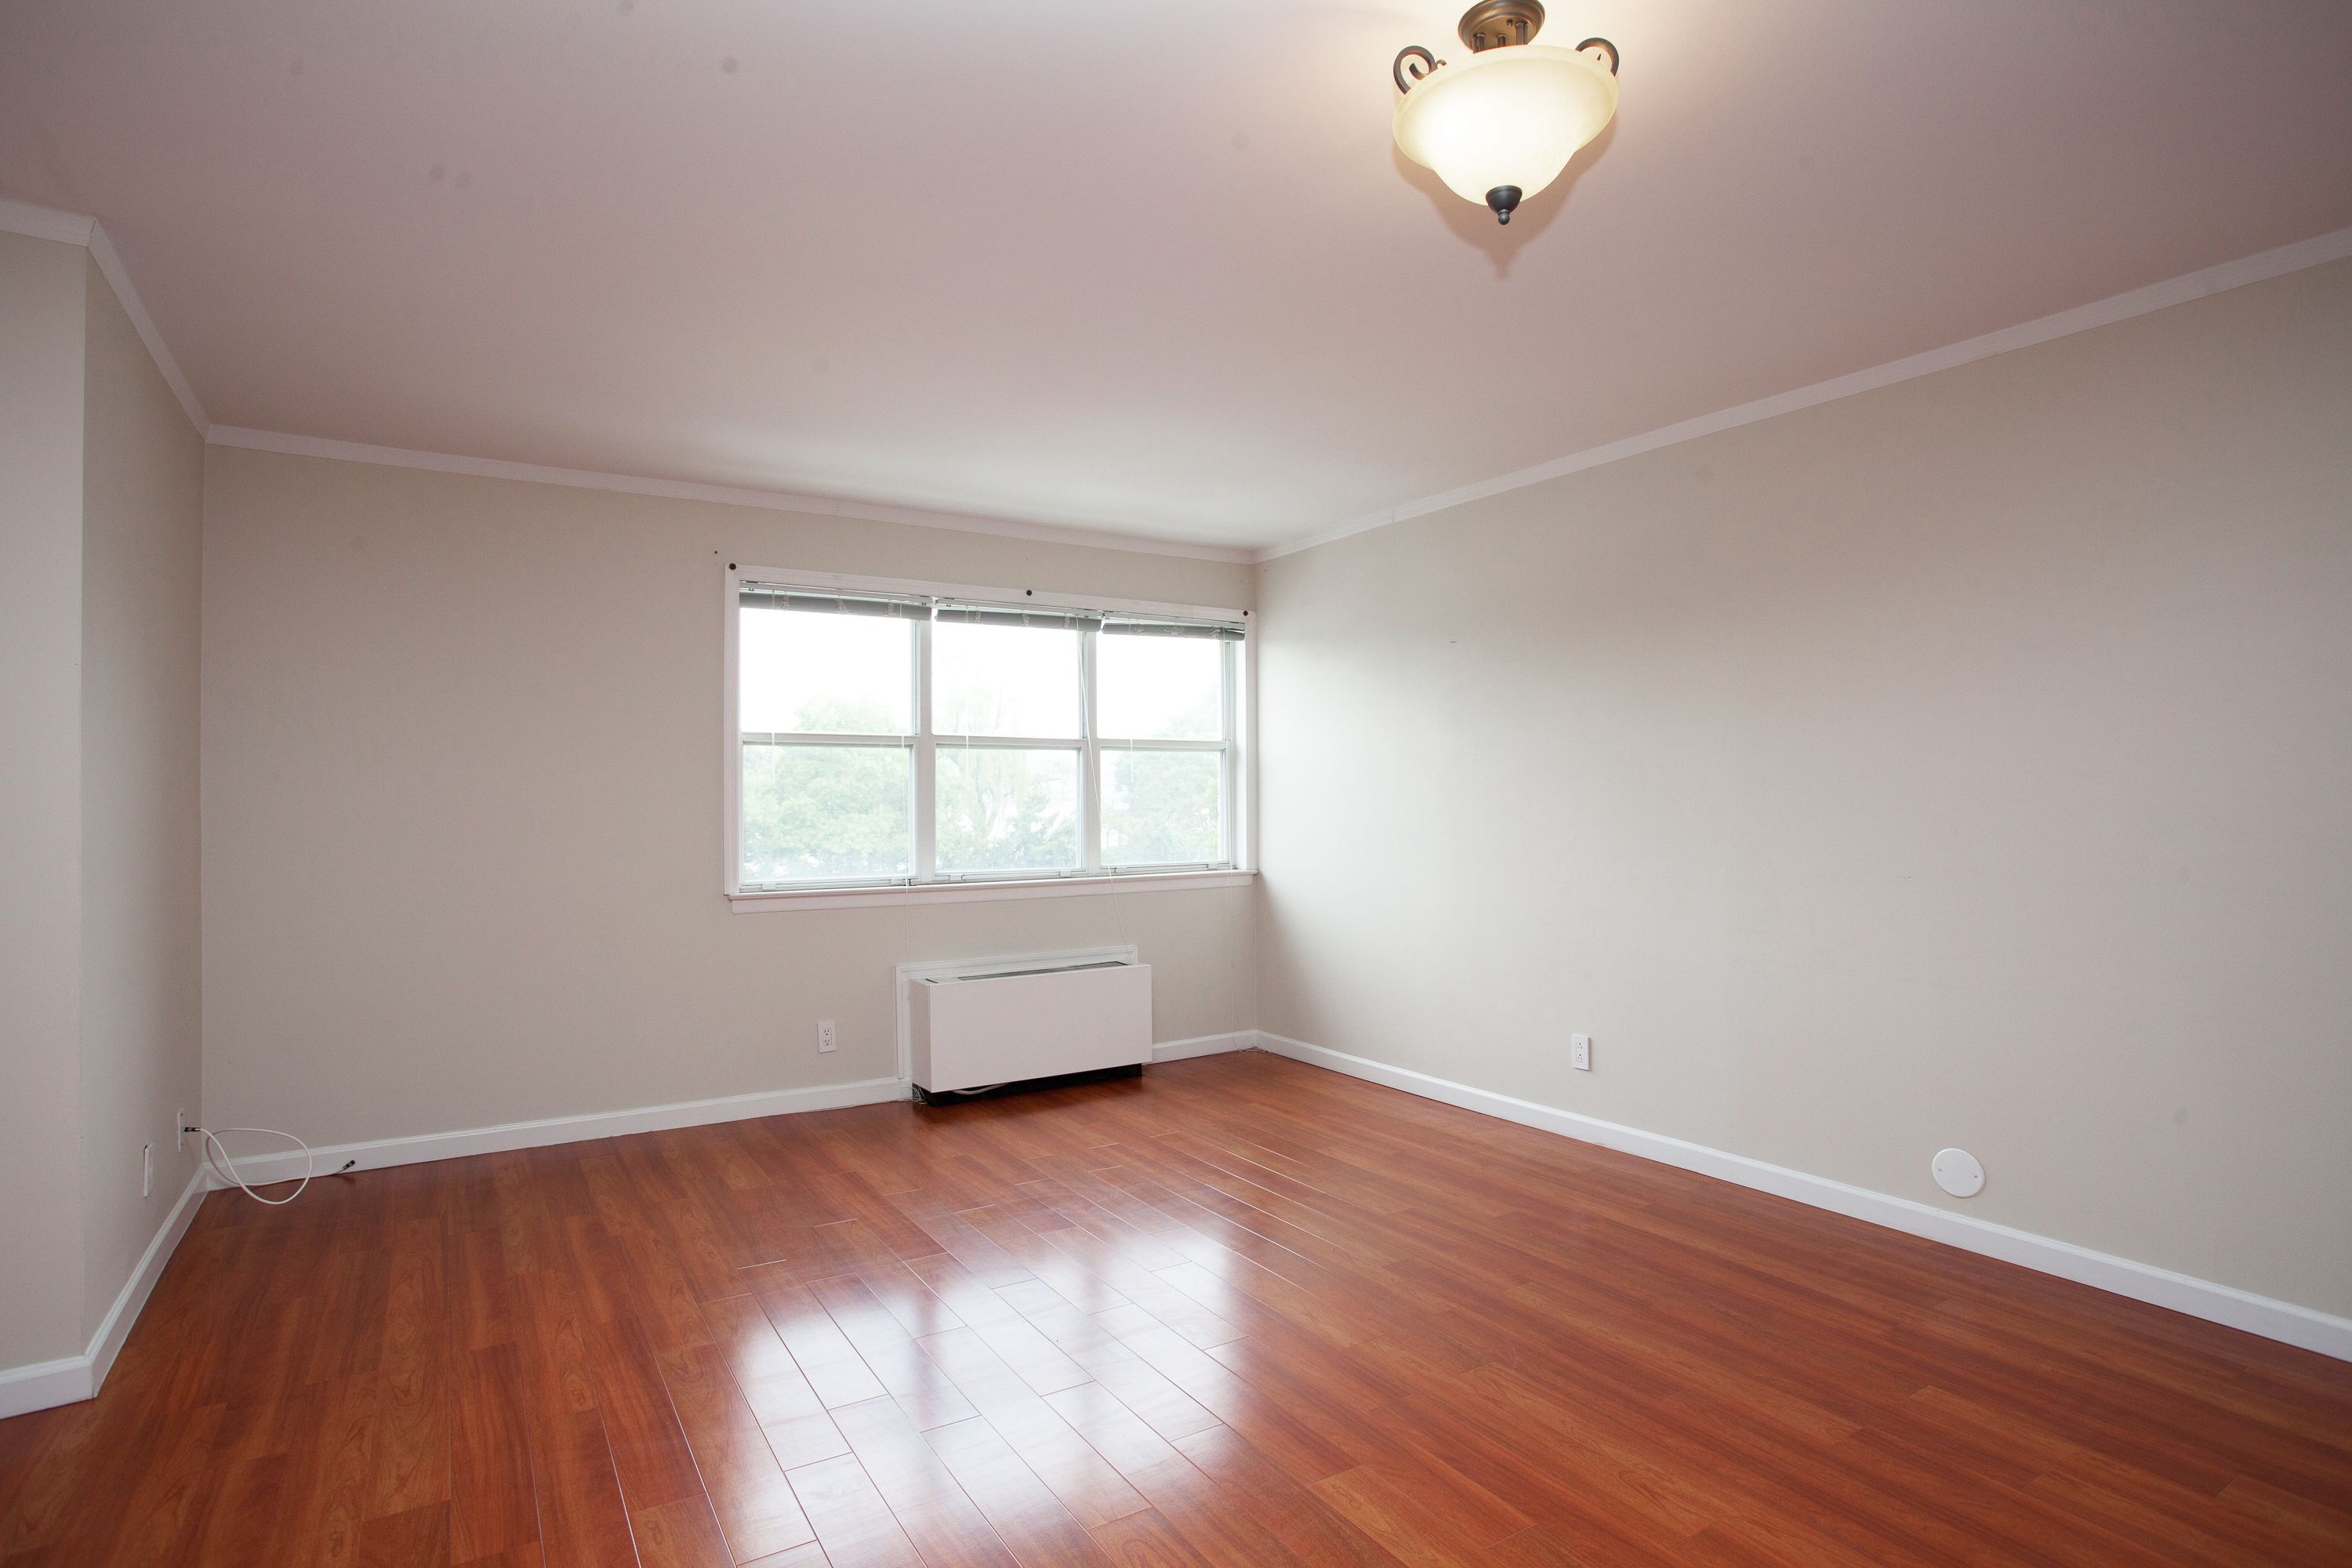 1111 river rd f 16 edgewater nj 07020 rental large room with wooden floor